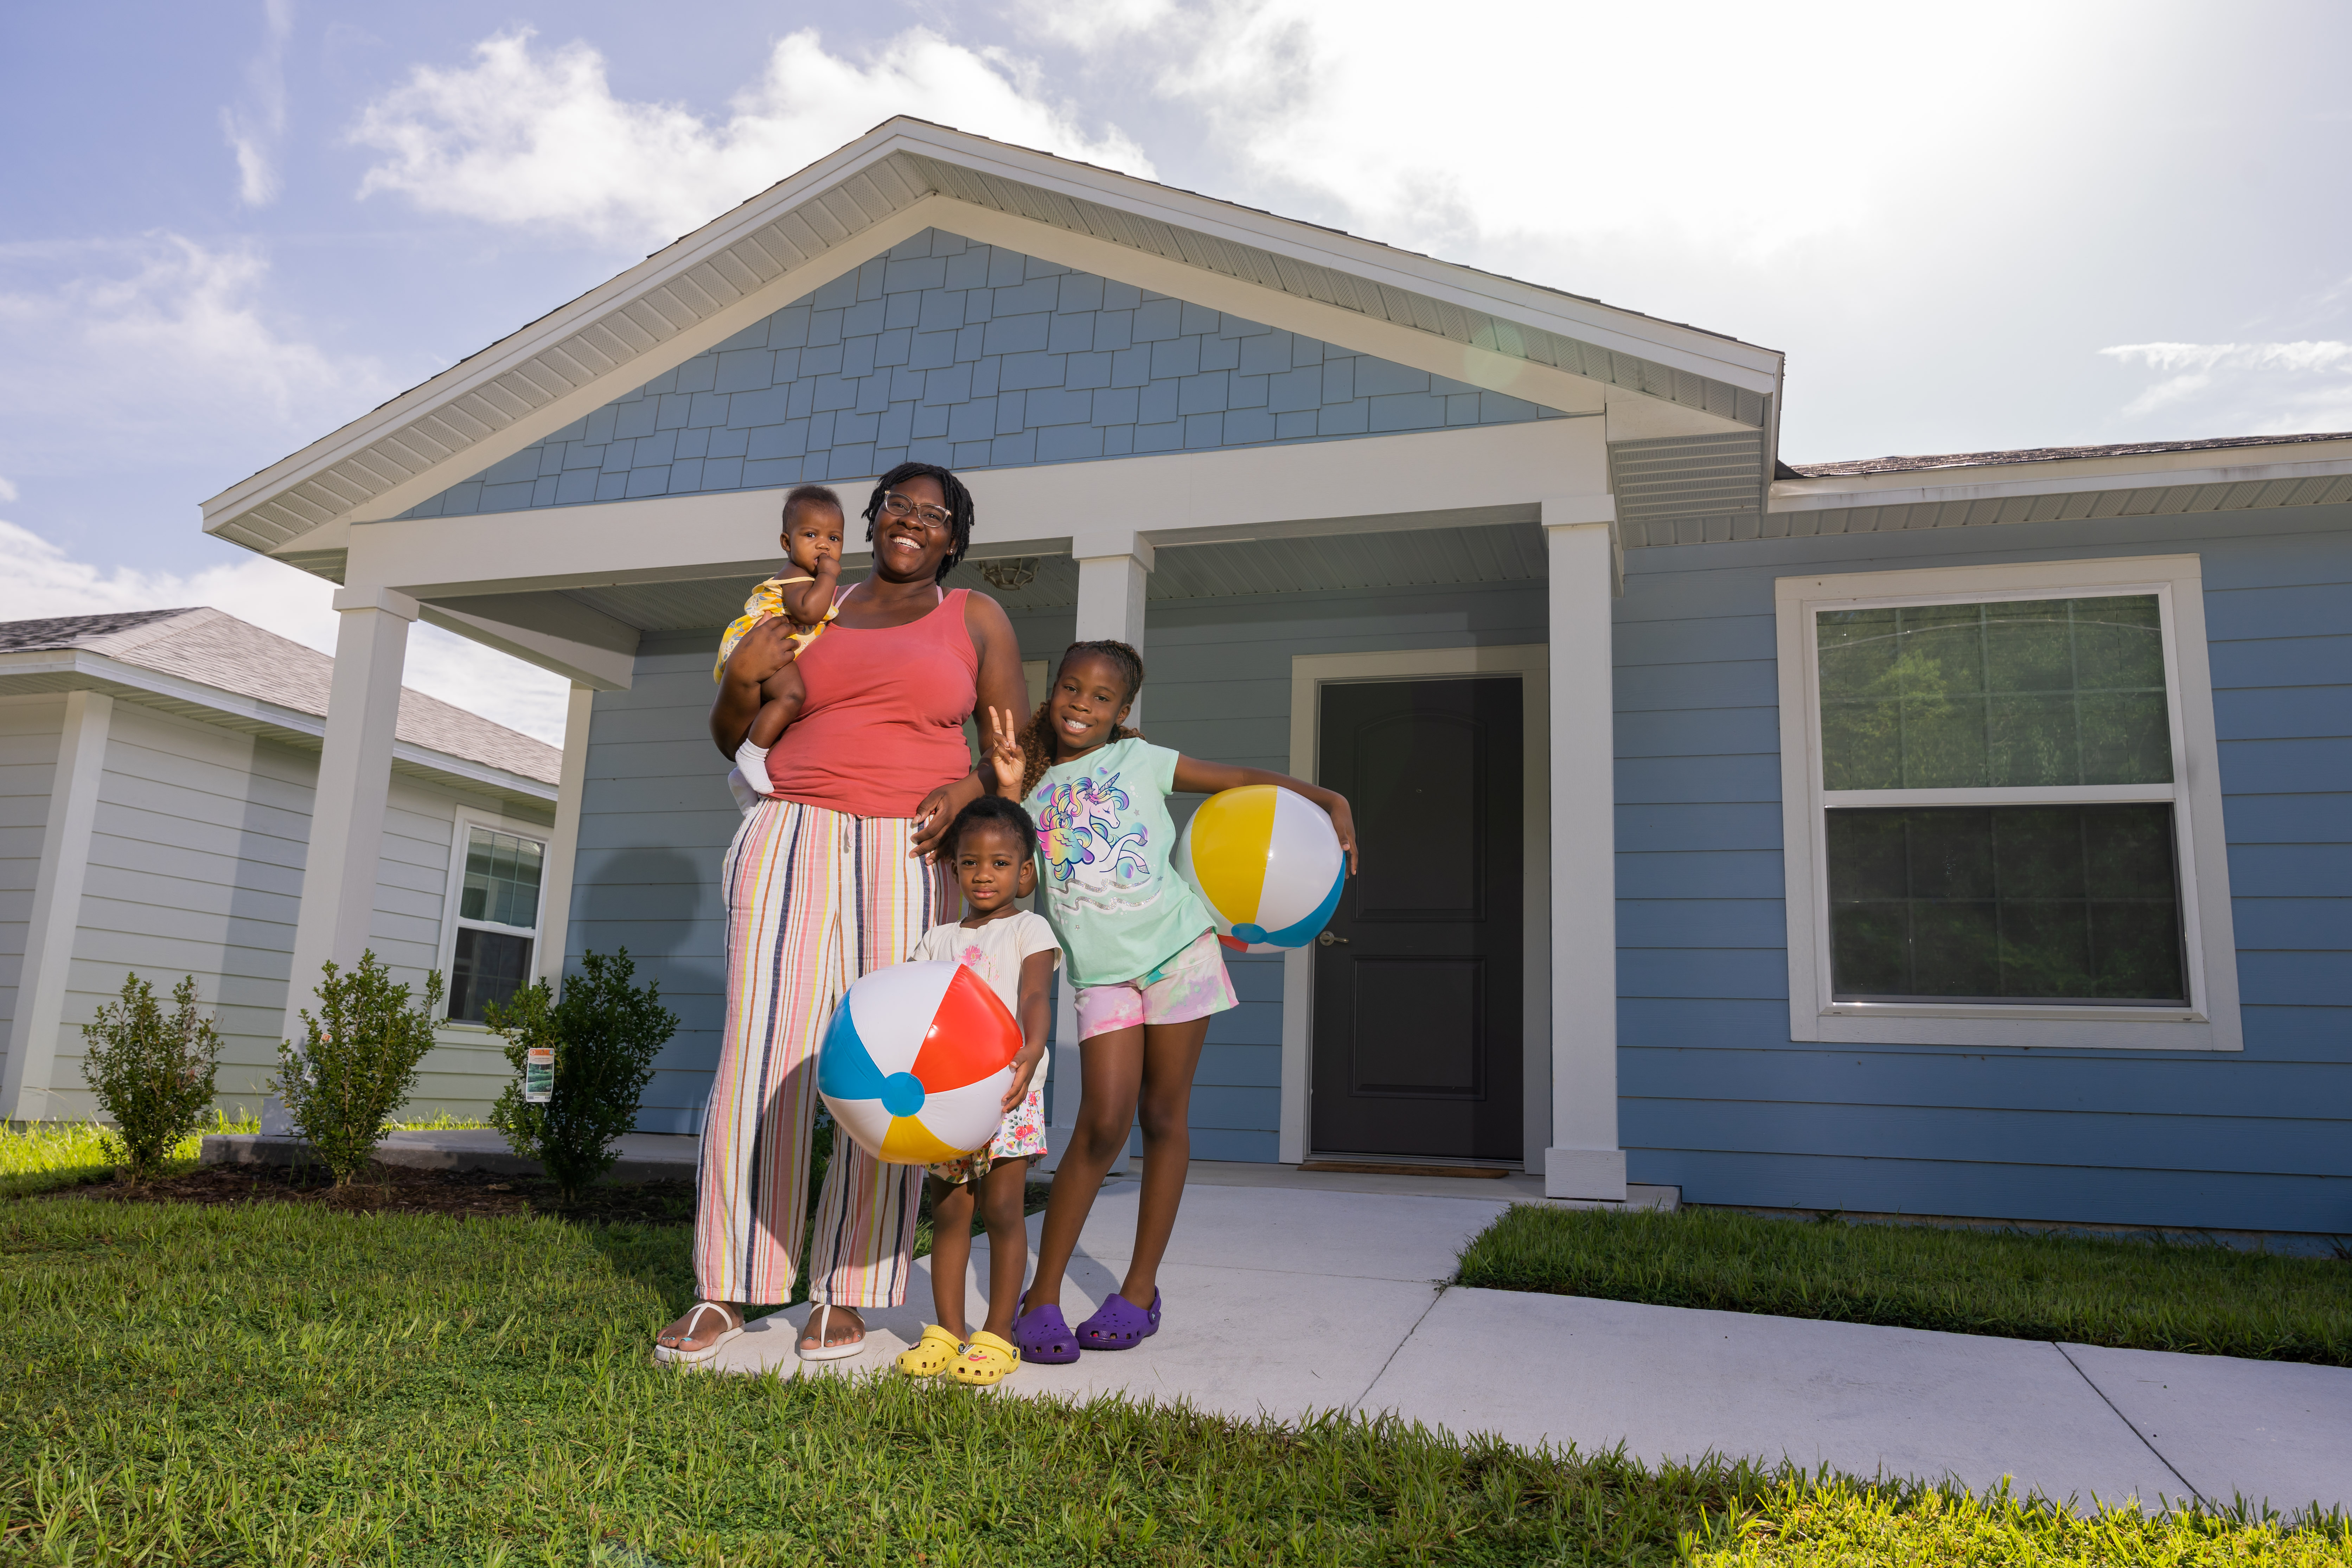 Habitat home means peace, love, and opportunity for Jaquira & her daughters